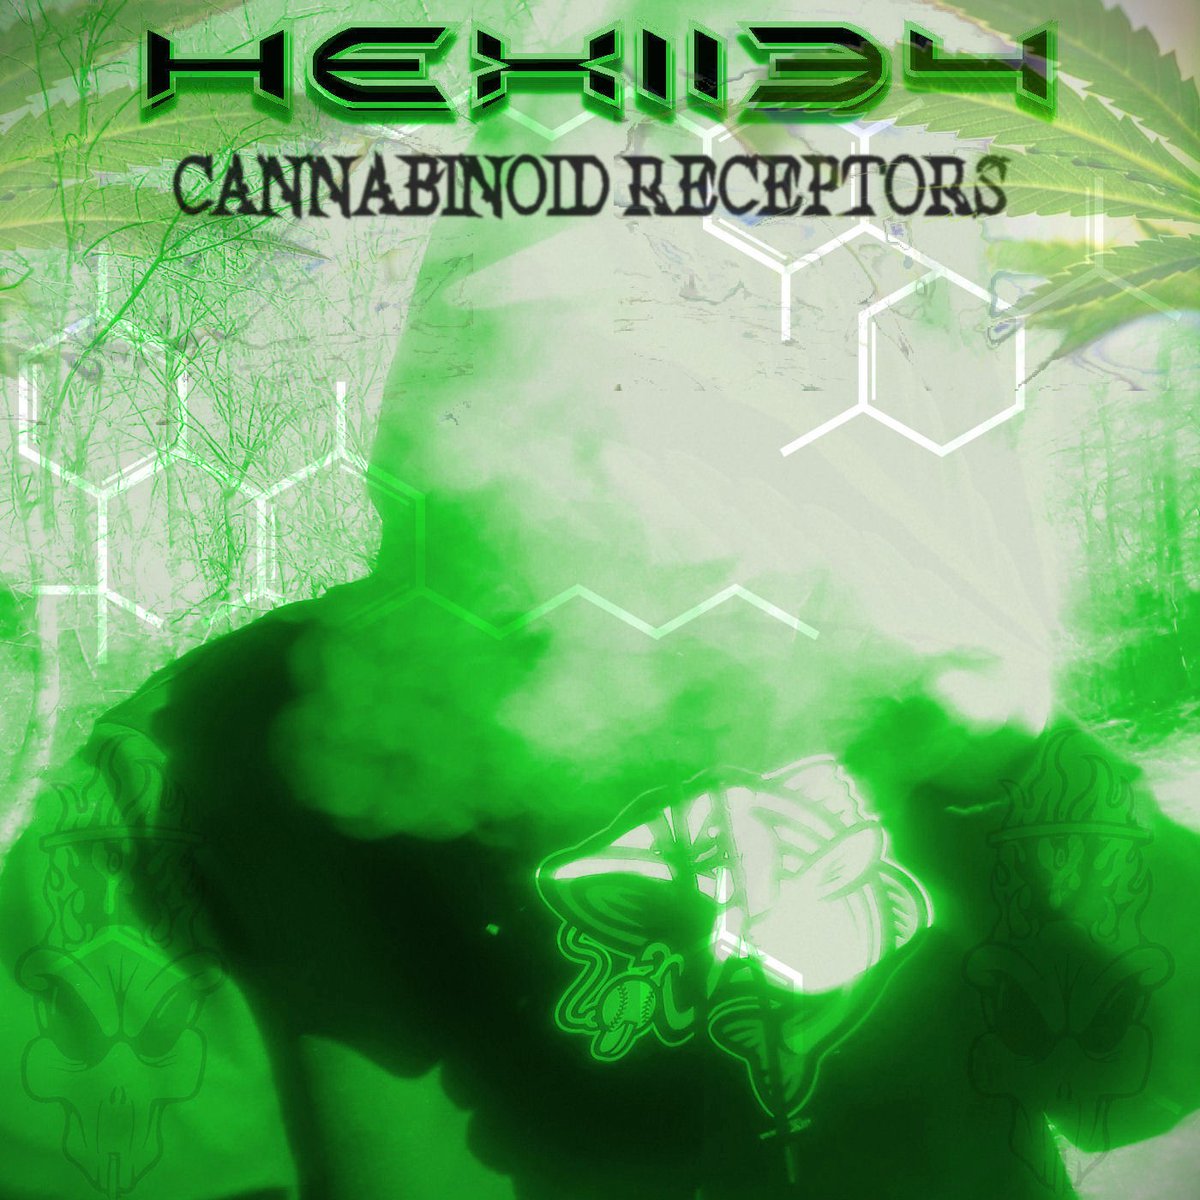 Cannabinoid Receptors (420 Release) OUT NOW